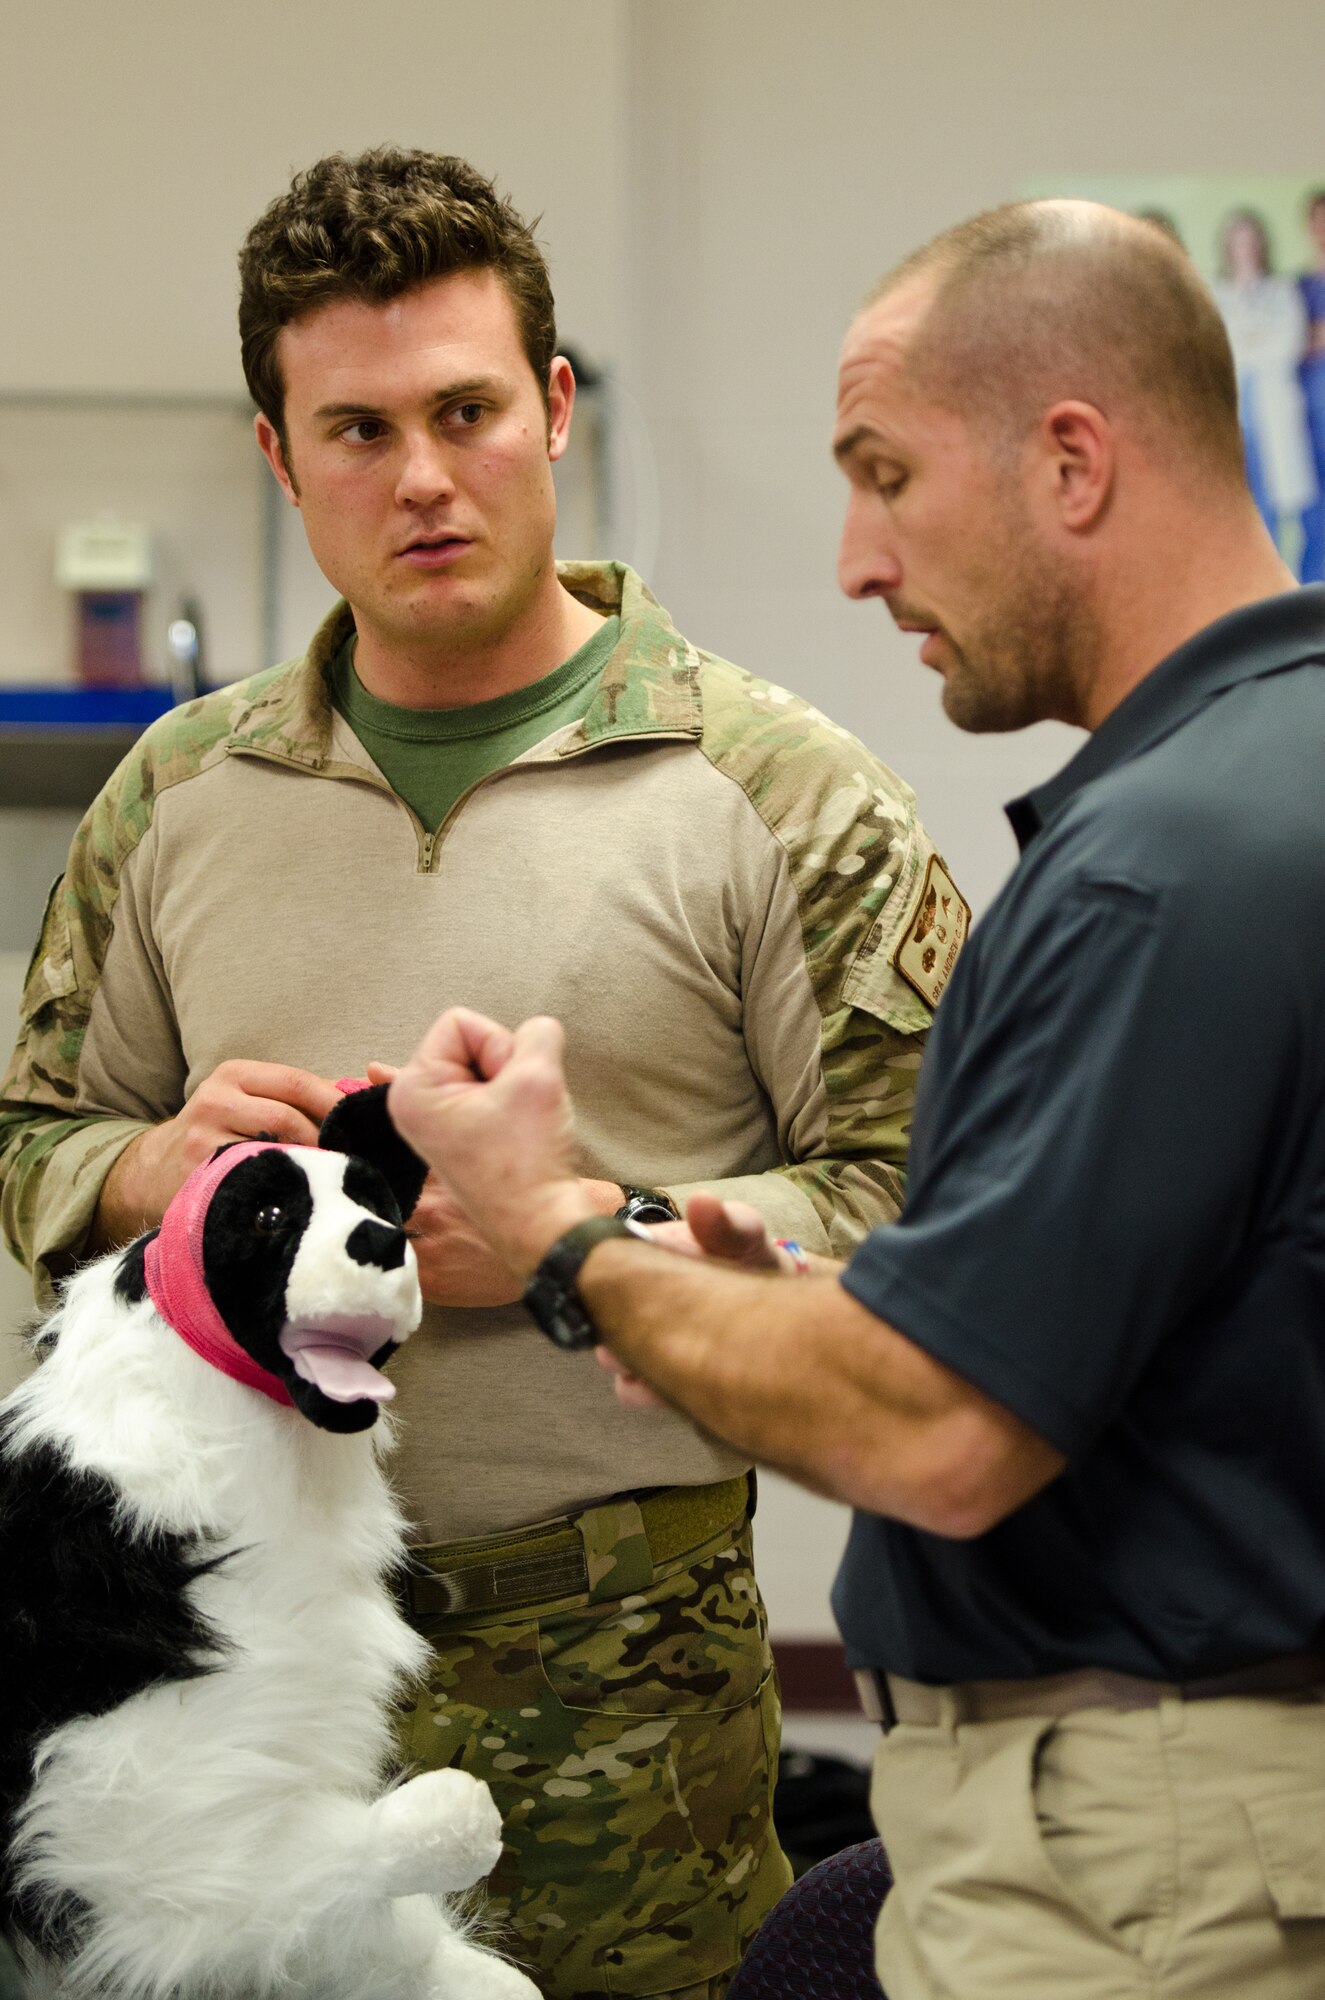 Thomas Barrett (right), a civilian paramedic and K9 medic trainer, speaks to Senior Airman Andrew Zina, a pararescueman from the Kentucky Air National Guard’s 123rd Special Tactics Squadron, about how to properly bandage and care for a military working dog that is wounded on the battlefield during a training course Dec. 5, 2013, at Jefferson Community College in Shelbyville, Ky. Barrett is one of 10 Kentucky Air Guard pararescuemen who learned to treat military working dogs during the two-day course. (U.S. Air National Guard photo by Master Sgt. Phil Speck)